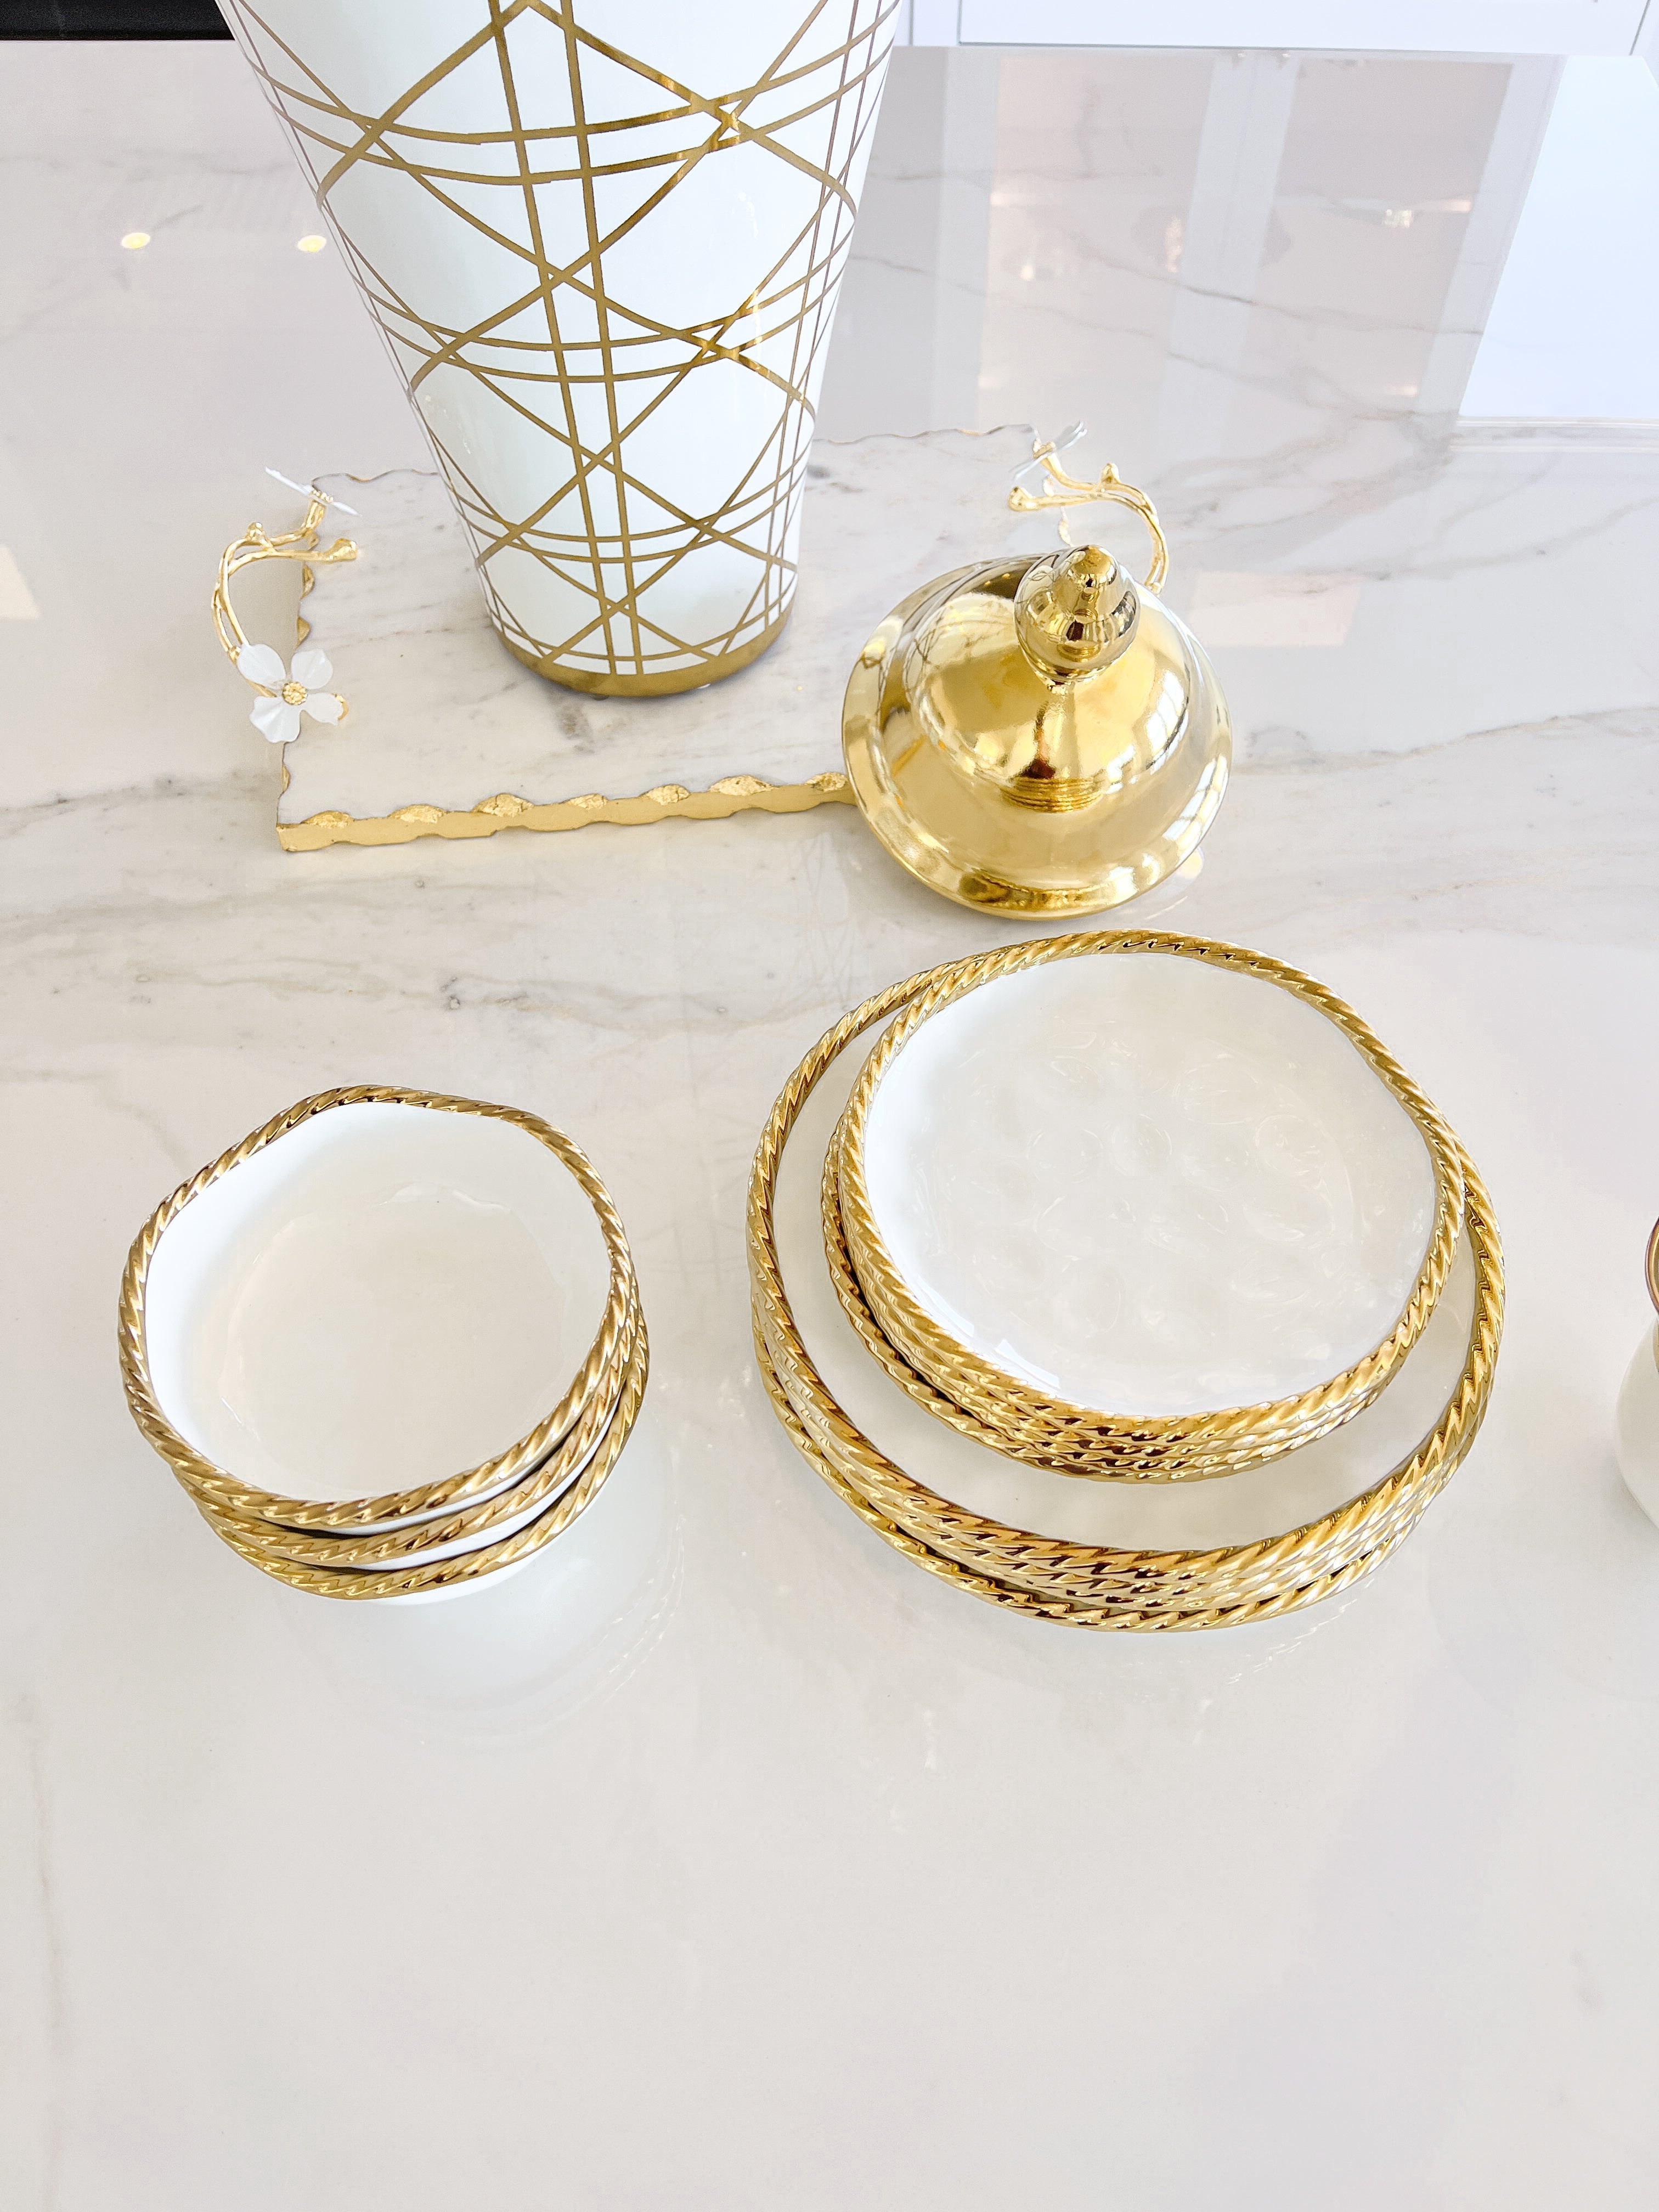 Gold Twisted Rope Dinner Plate (Set of 4) - HTS HOME DECOR